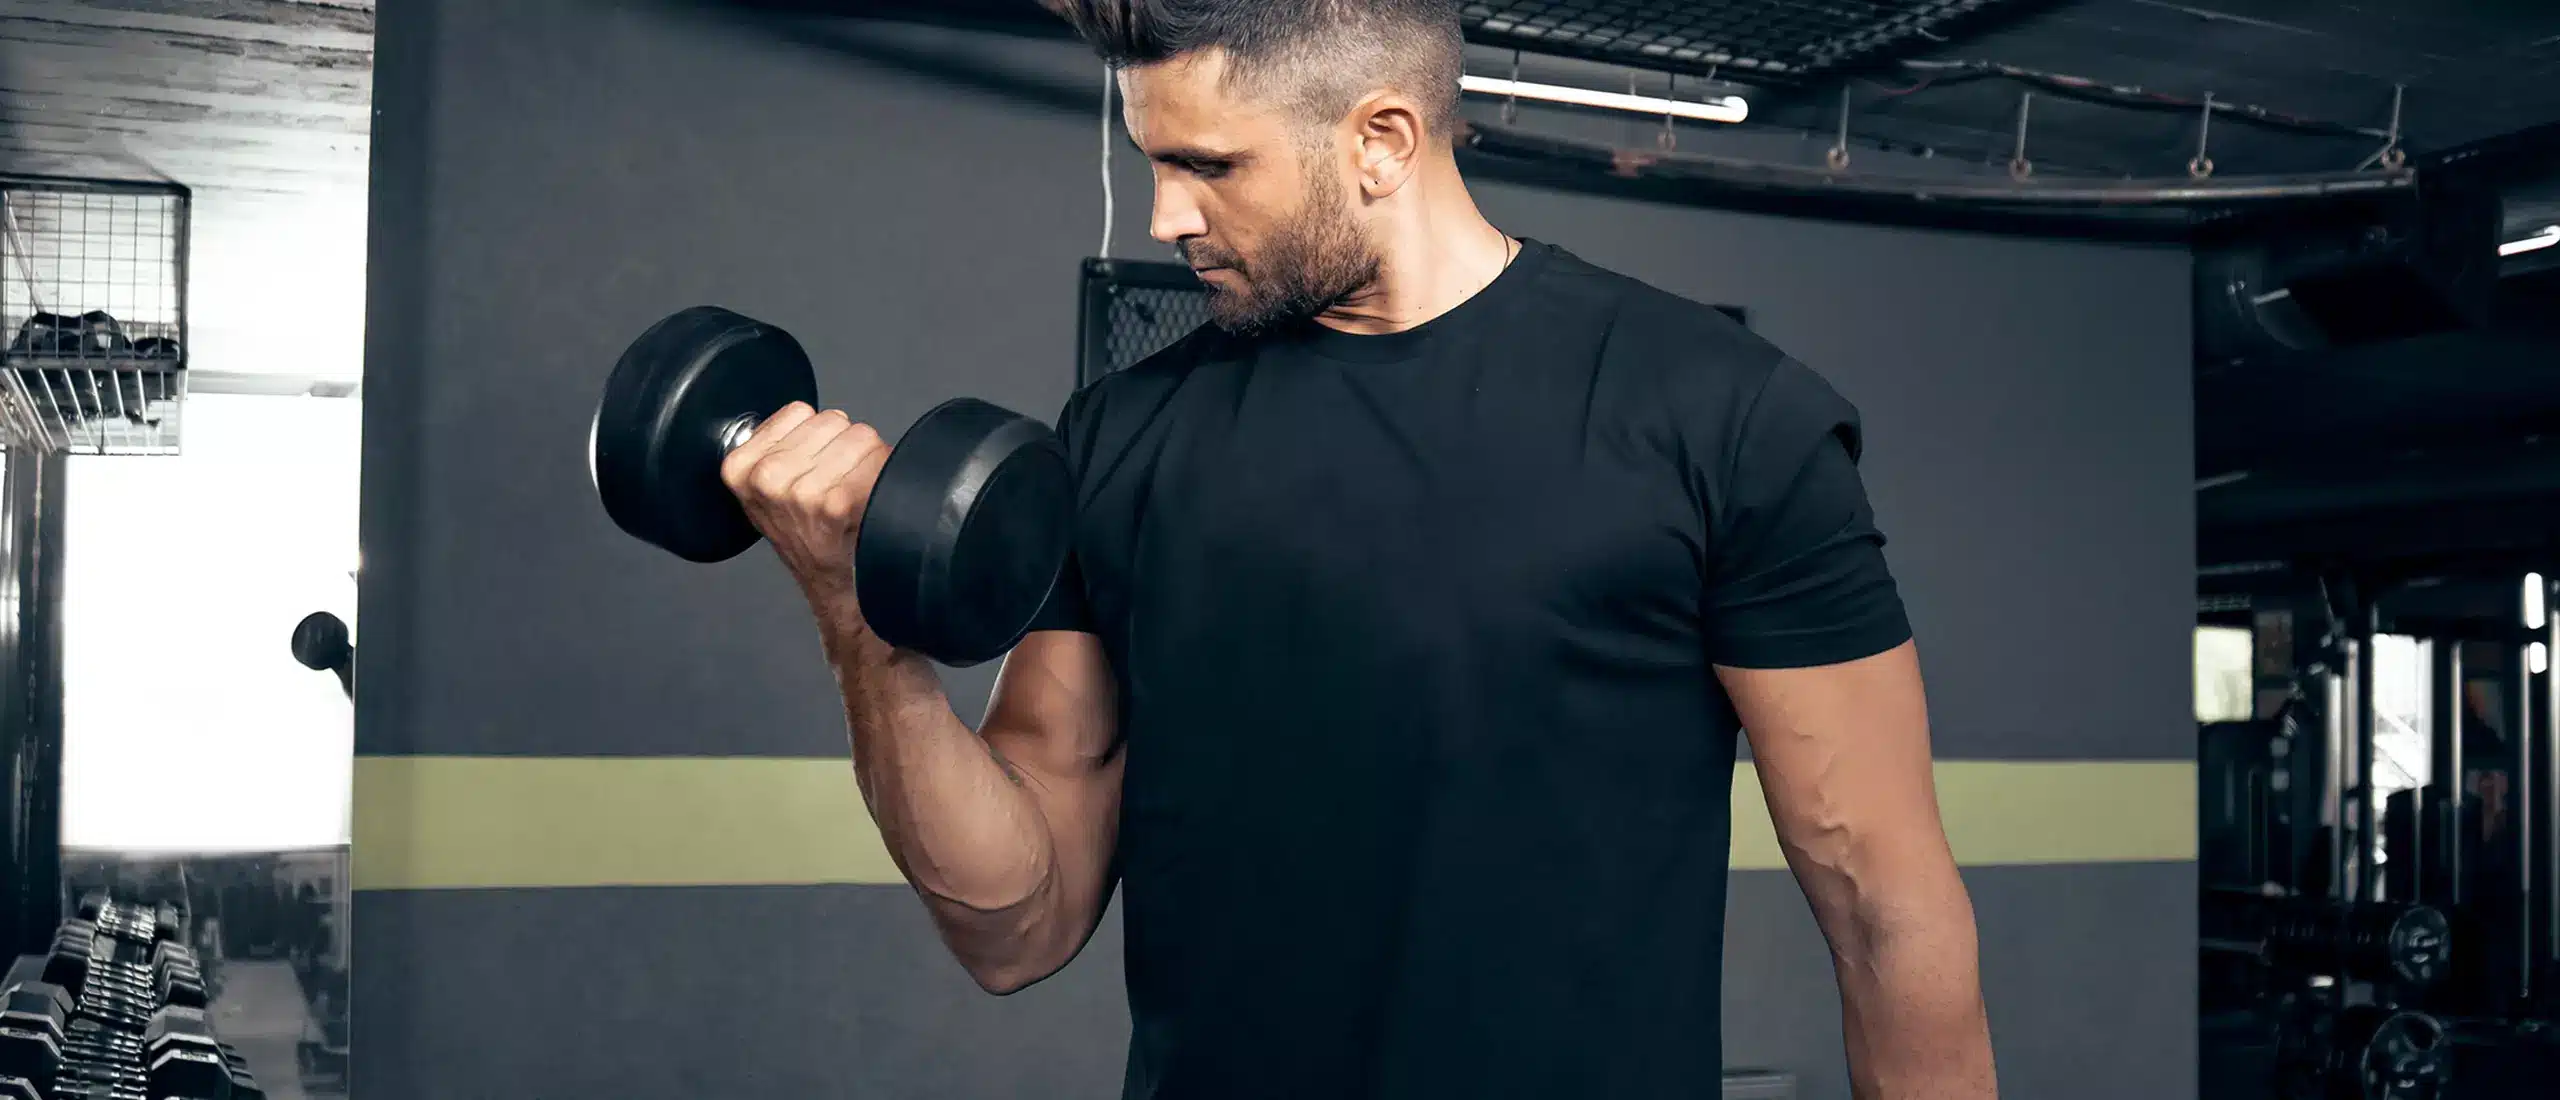 Man doing a bicep curl with a dumbell